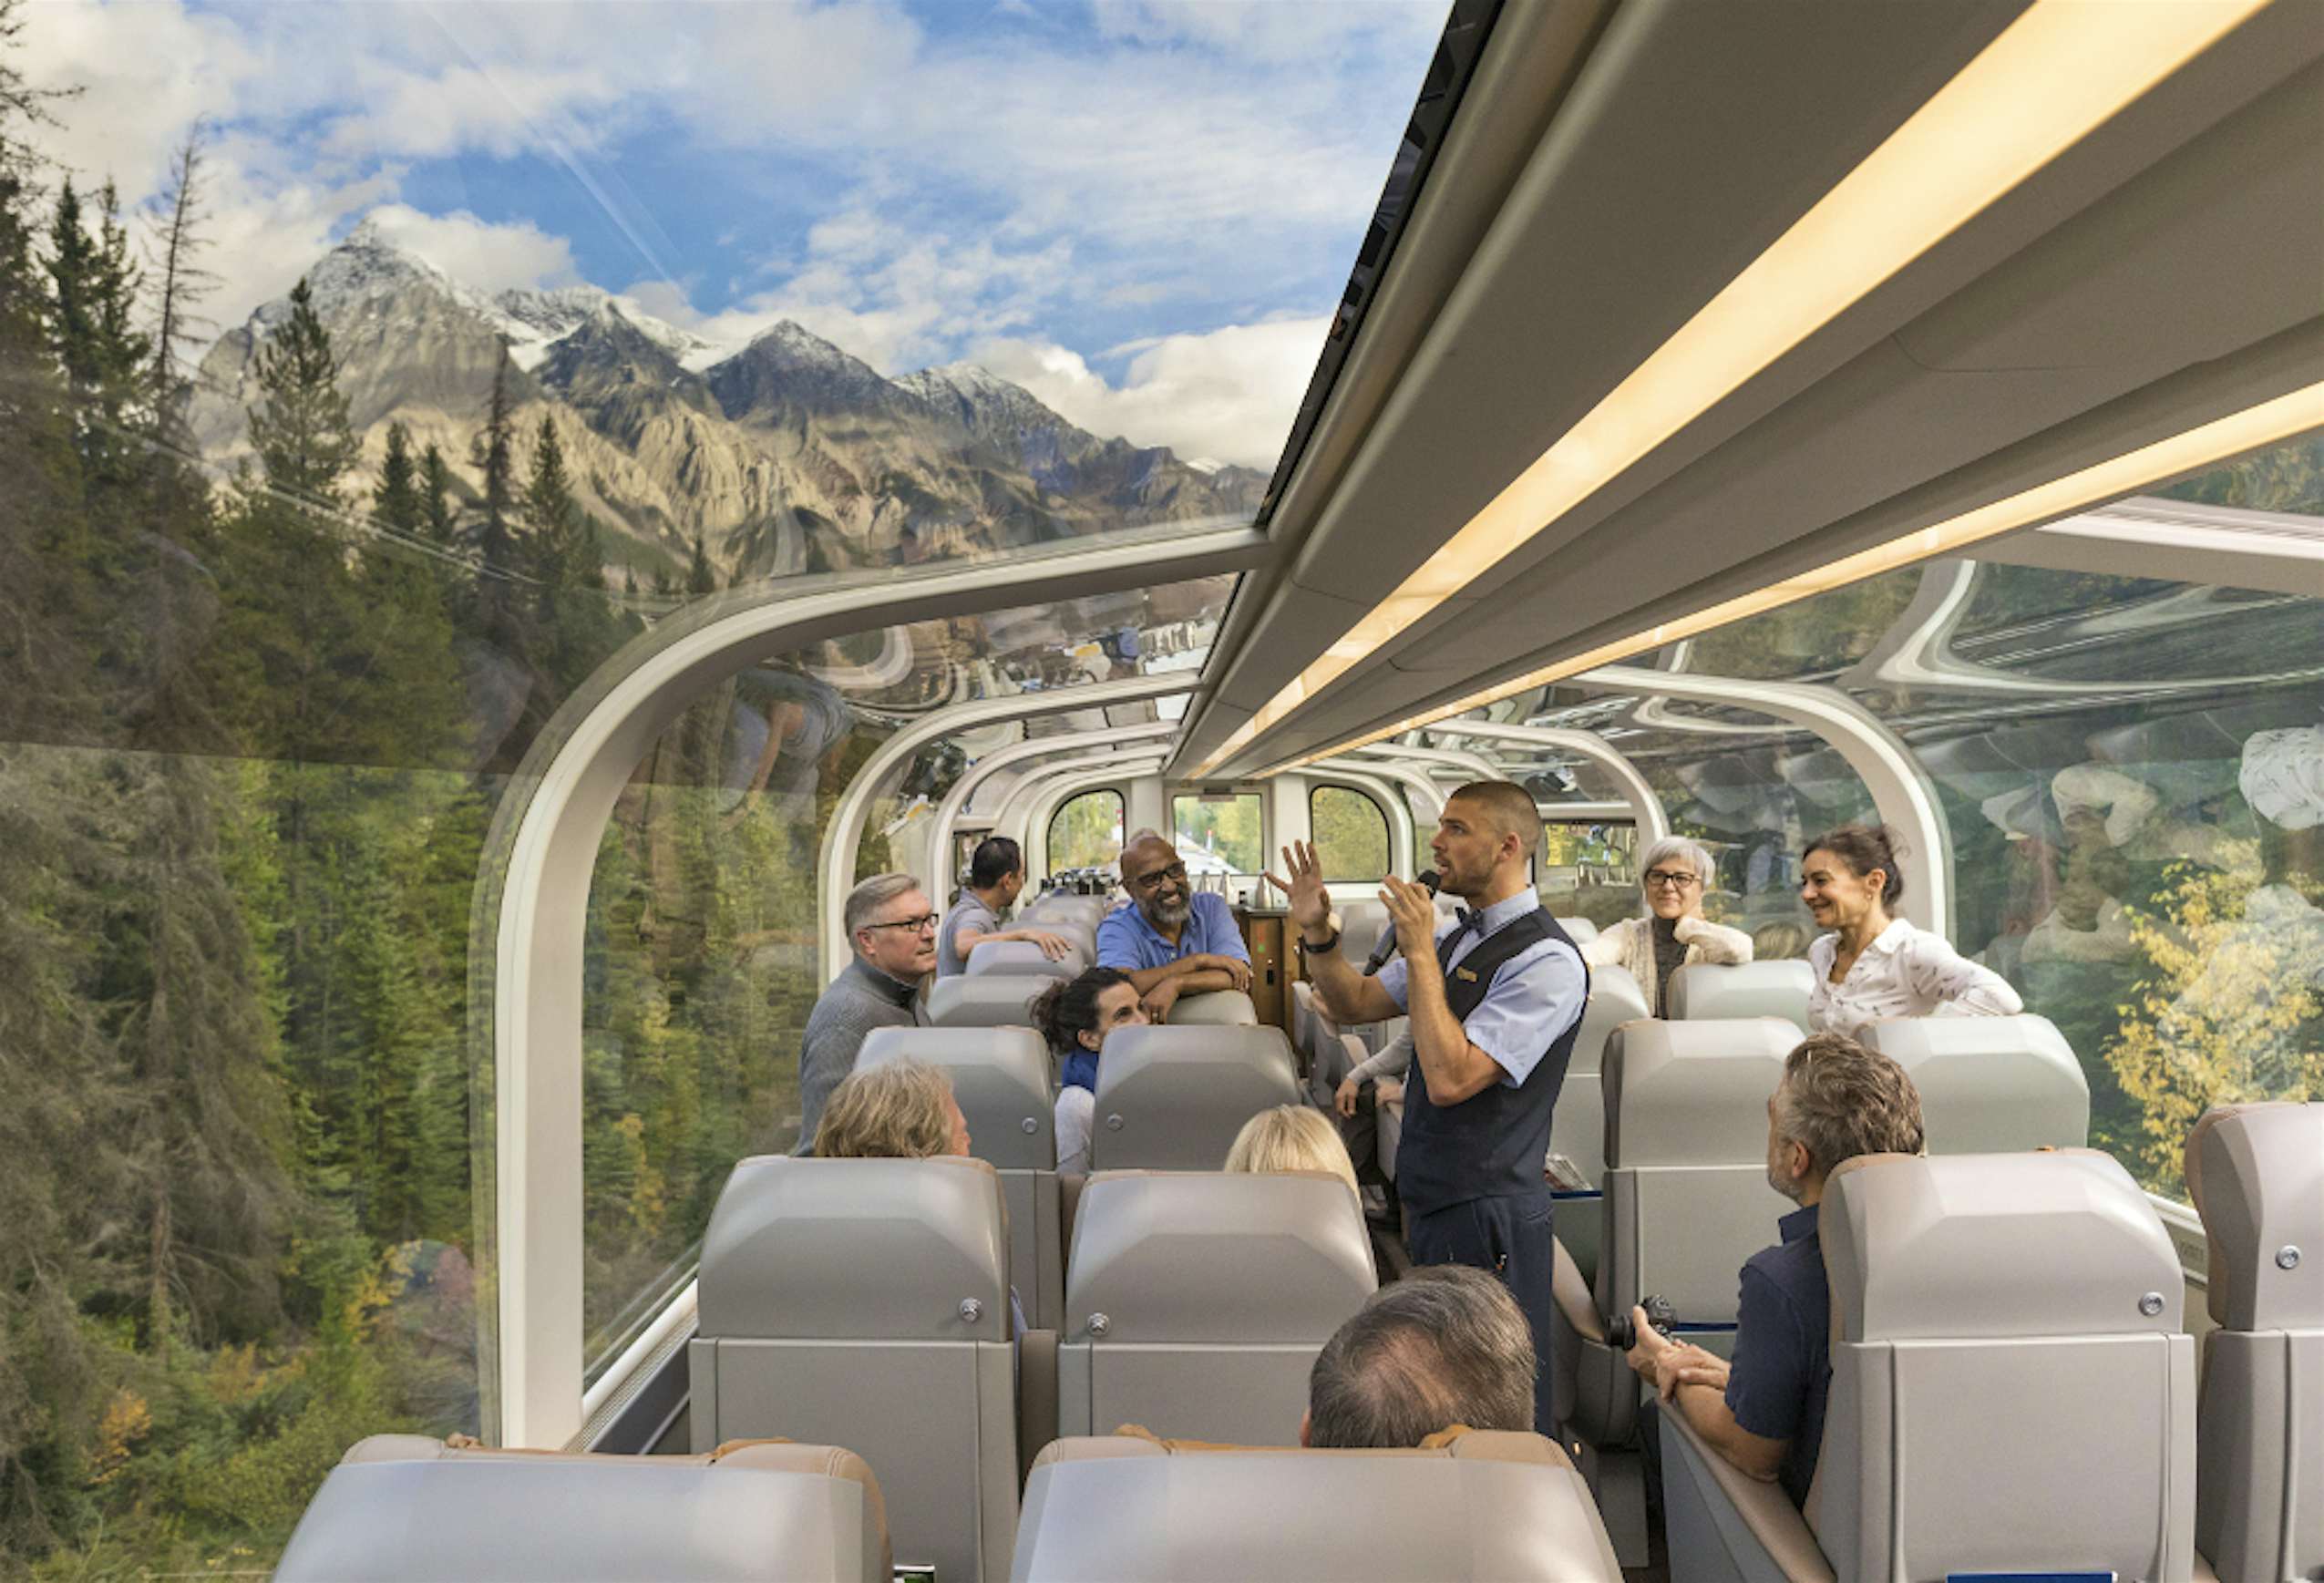 Take a glassdomed train ride through the rugged Canadian Rockies